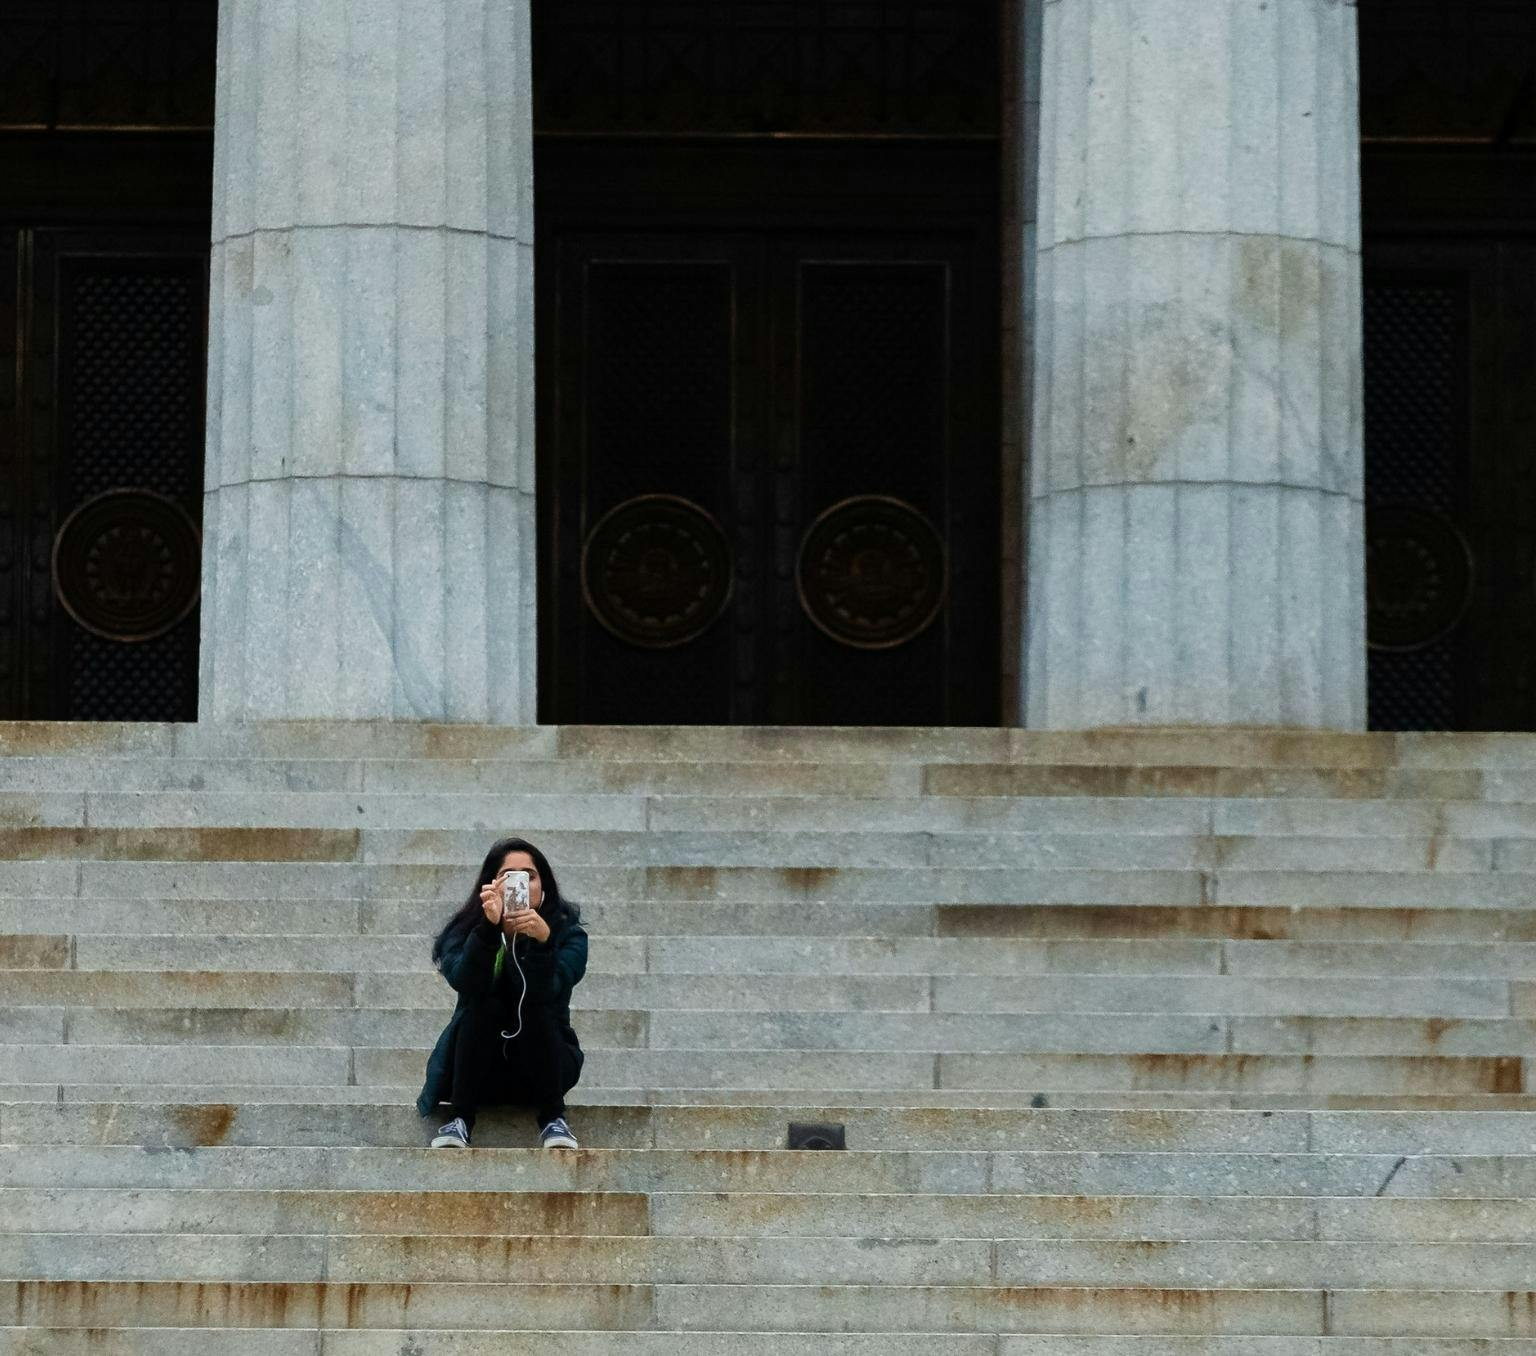 young person looking at their phone and sitting on a set of sandstone steps with large round columns behind. There is no one else in the image